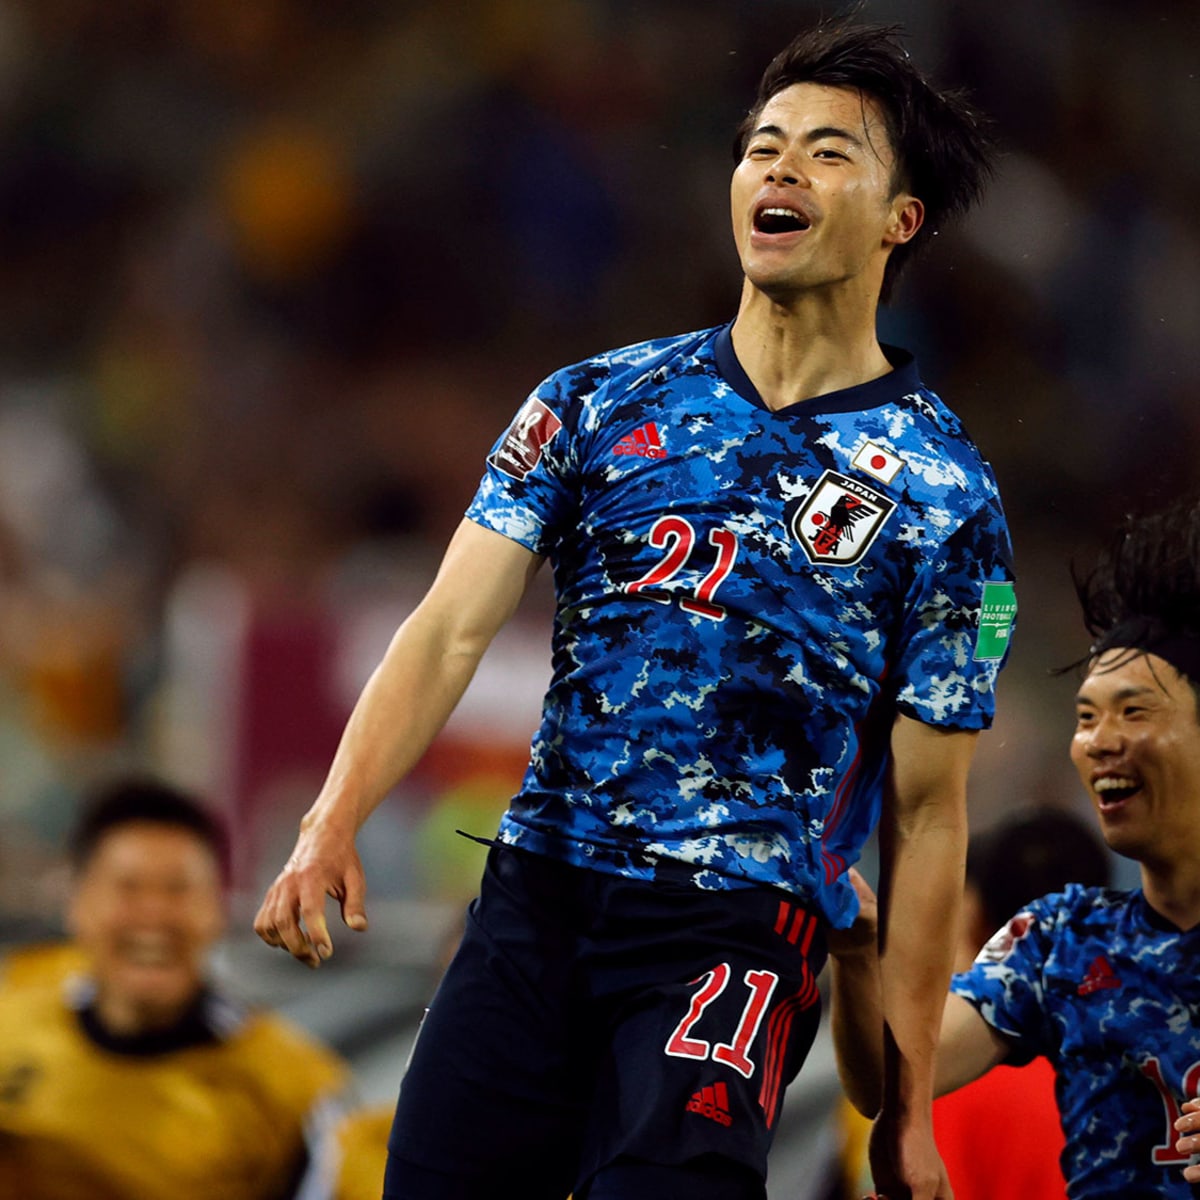 japan jersey world cup 2022